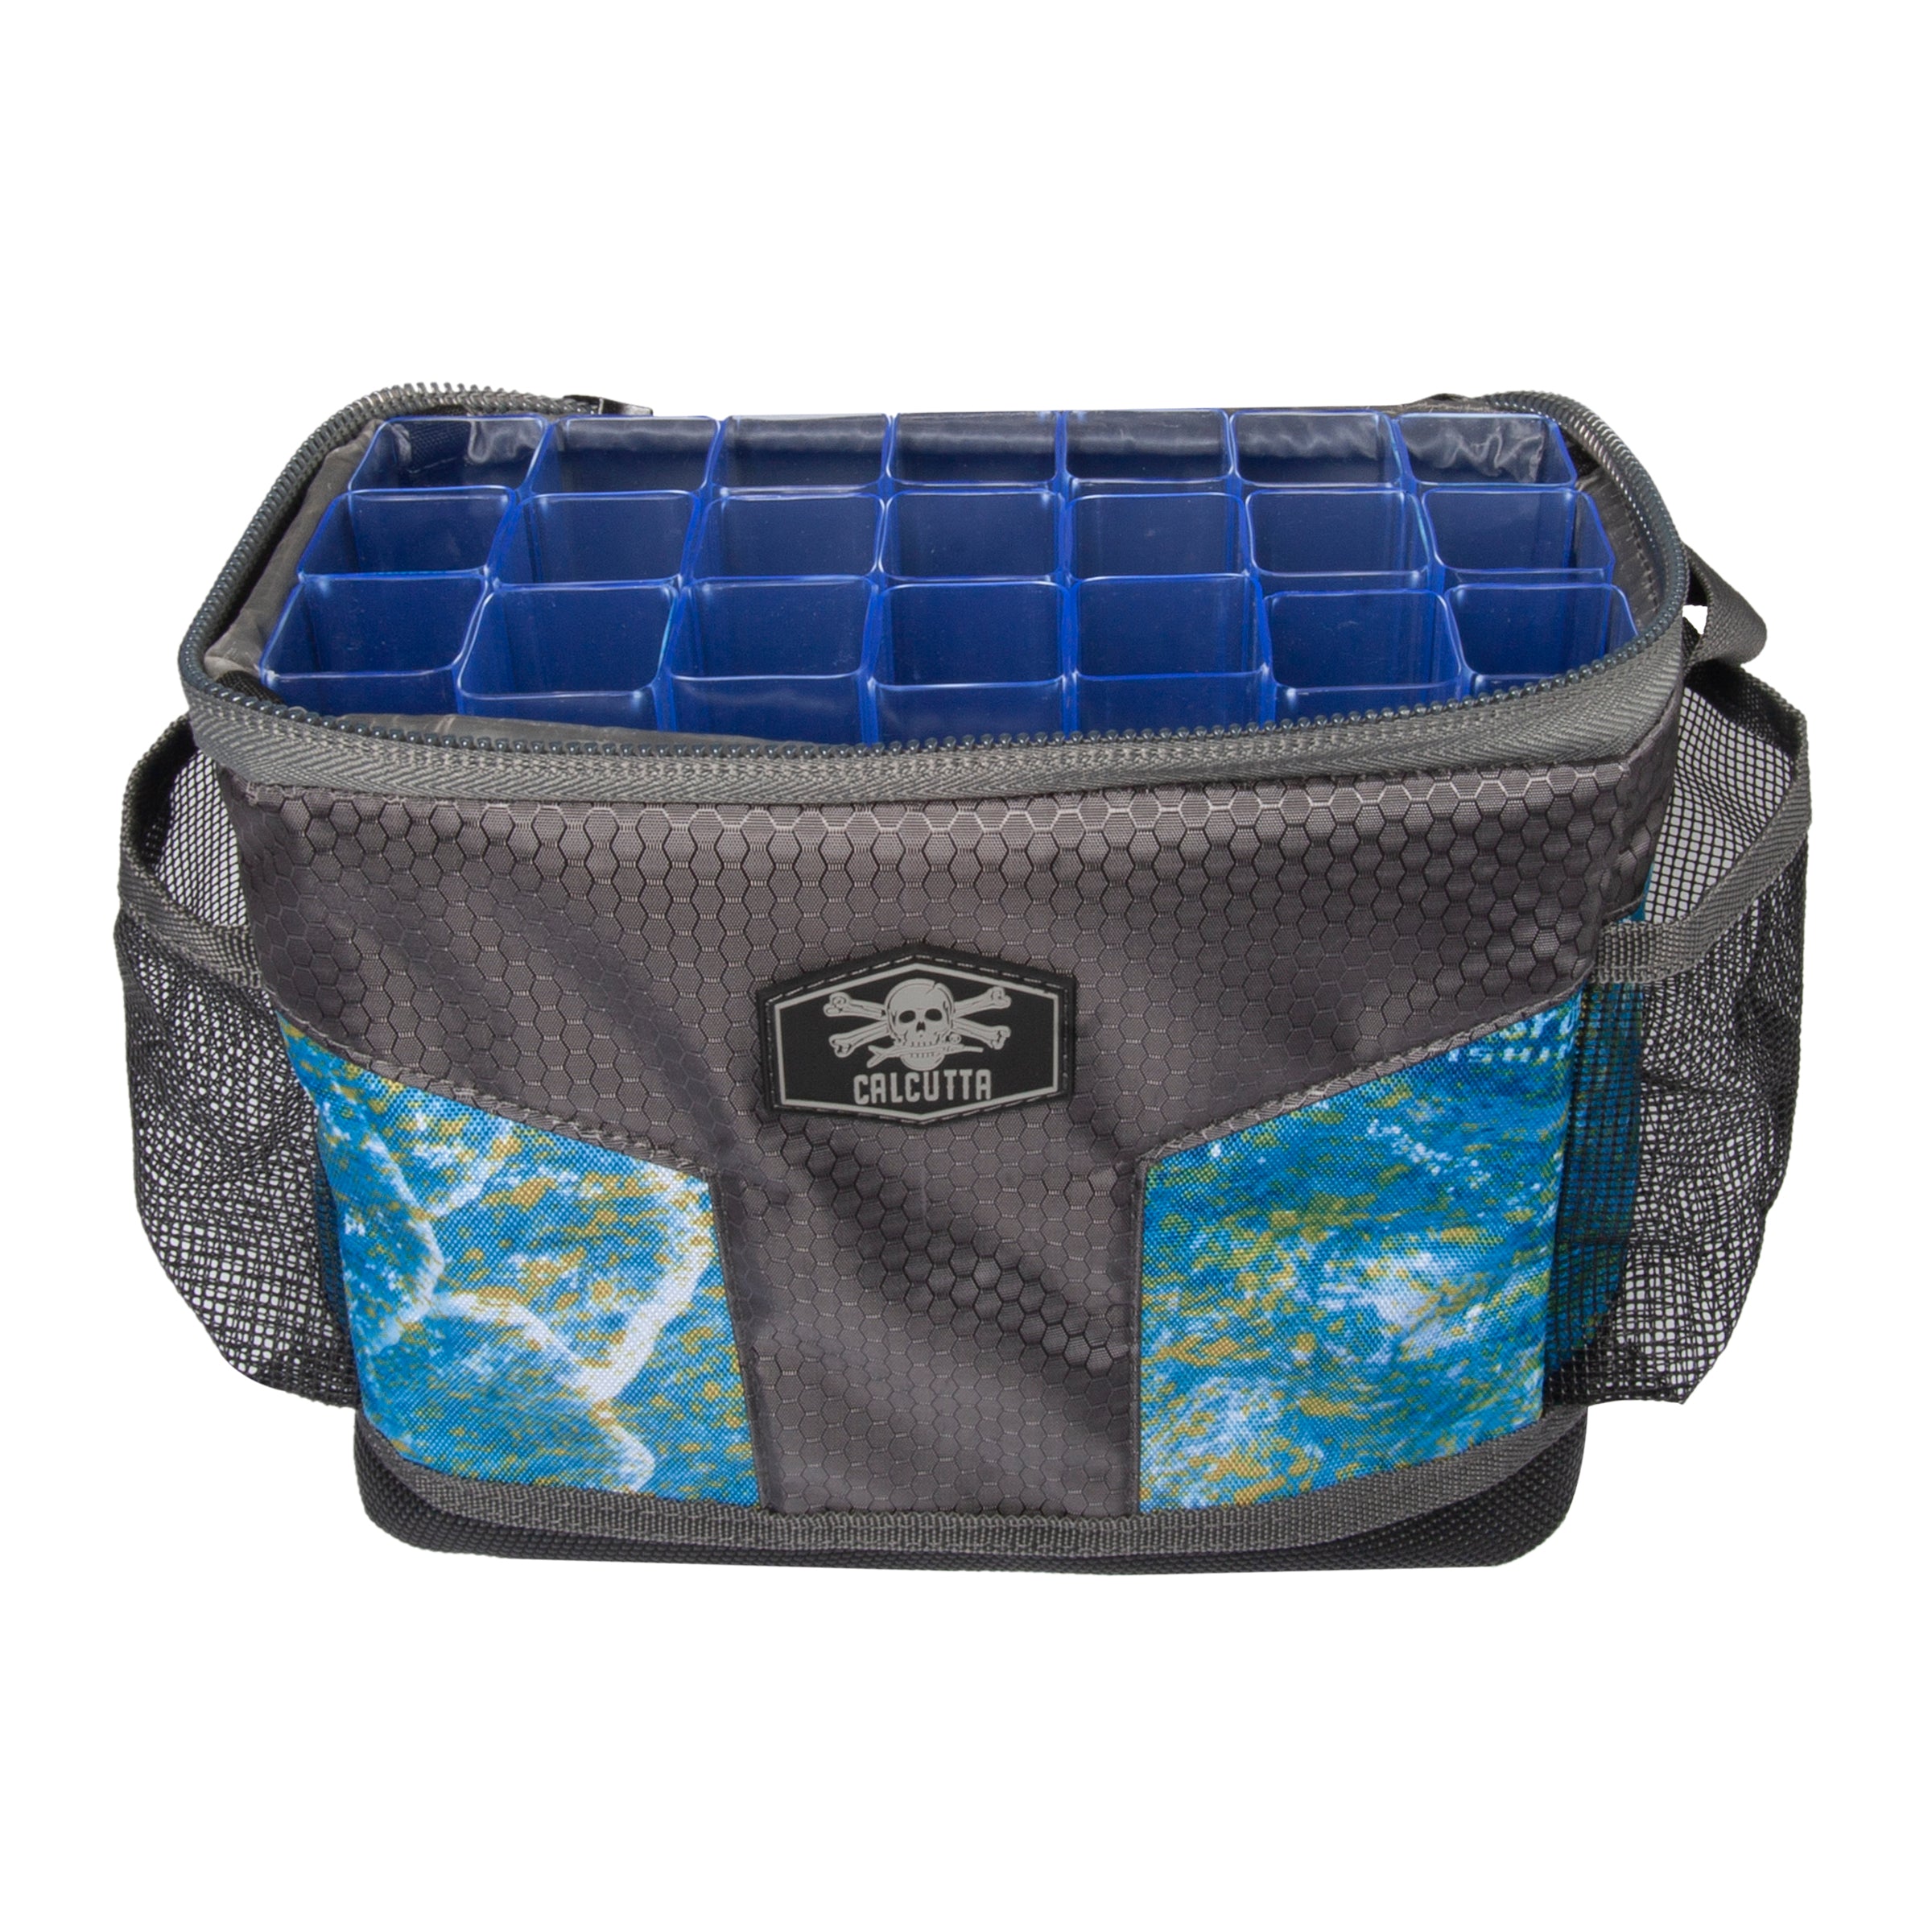 Outdoor Rolling Tackle Box With Wheels - Waterproof Storage Bag Bac